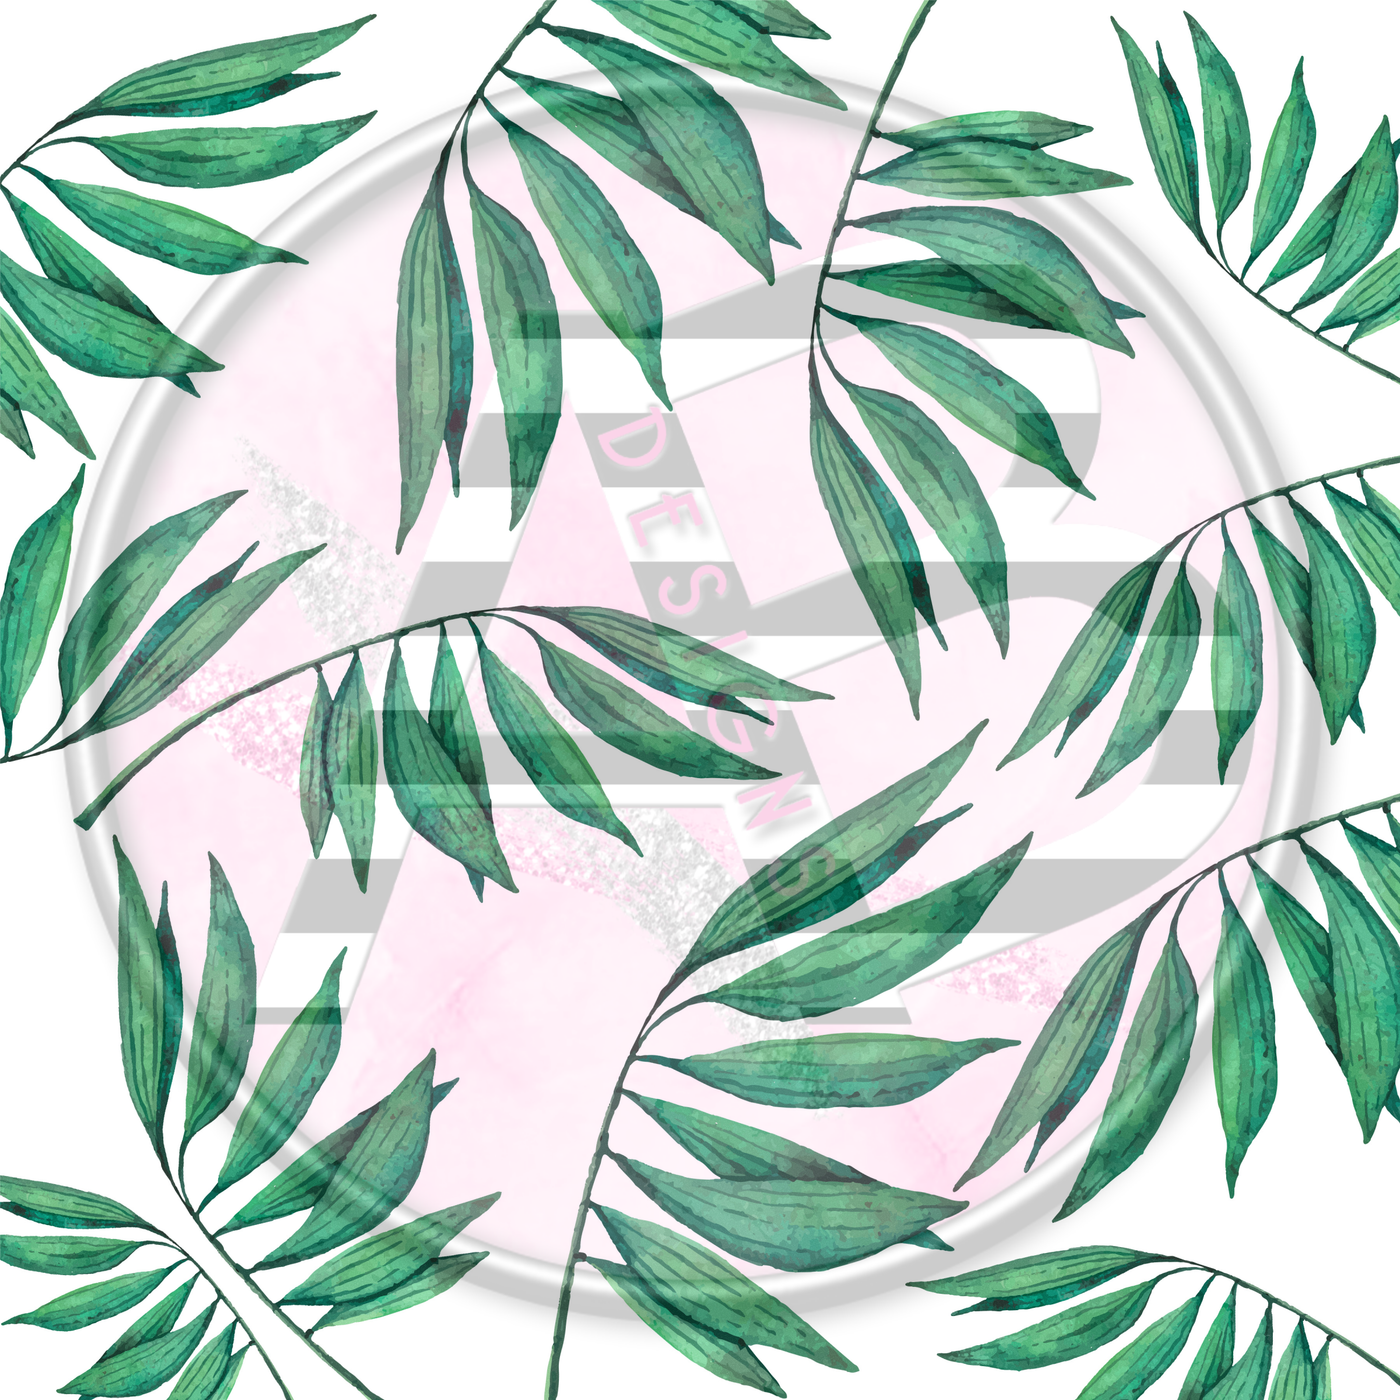 Adhesive Patterned Vinyl - Tropical Exotic Floral 60